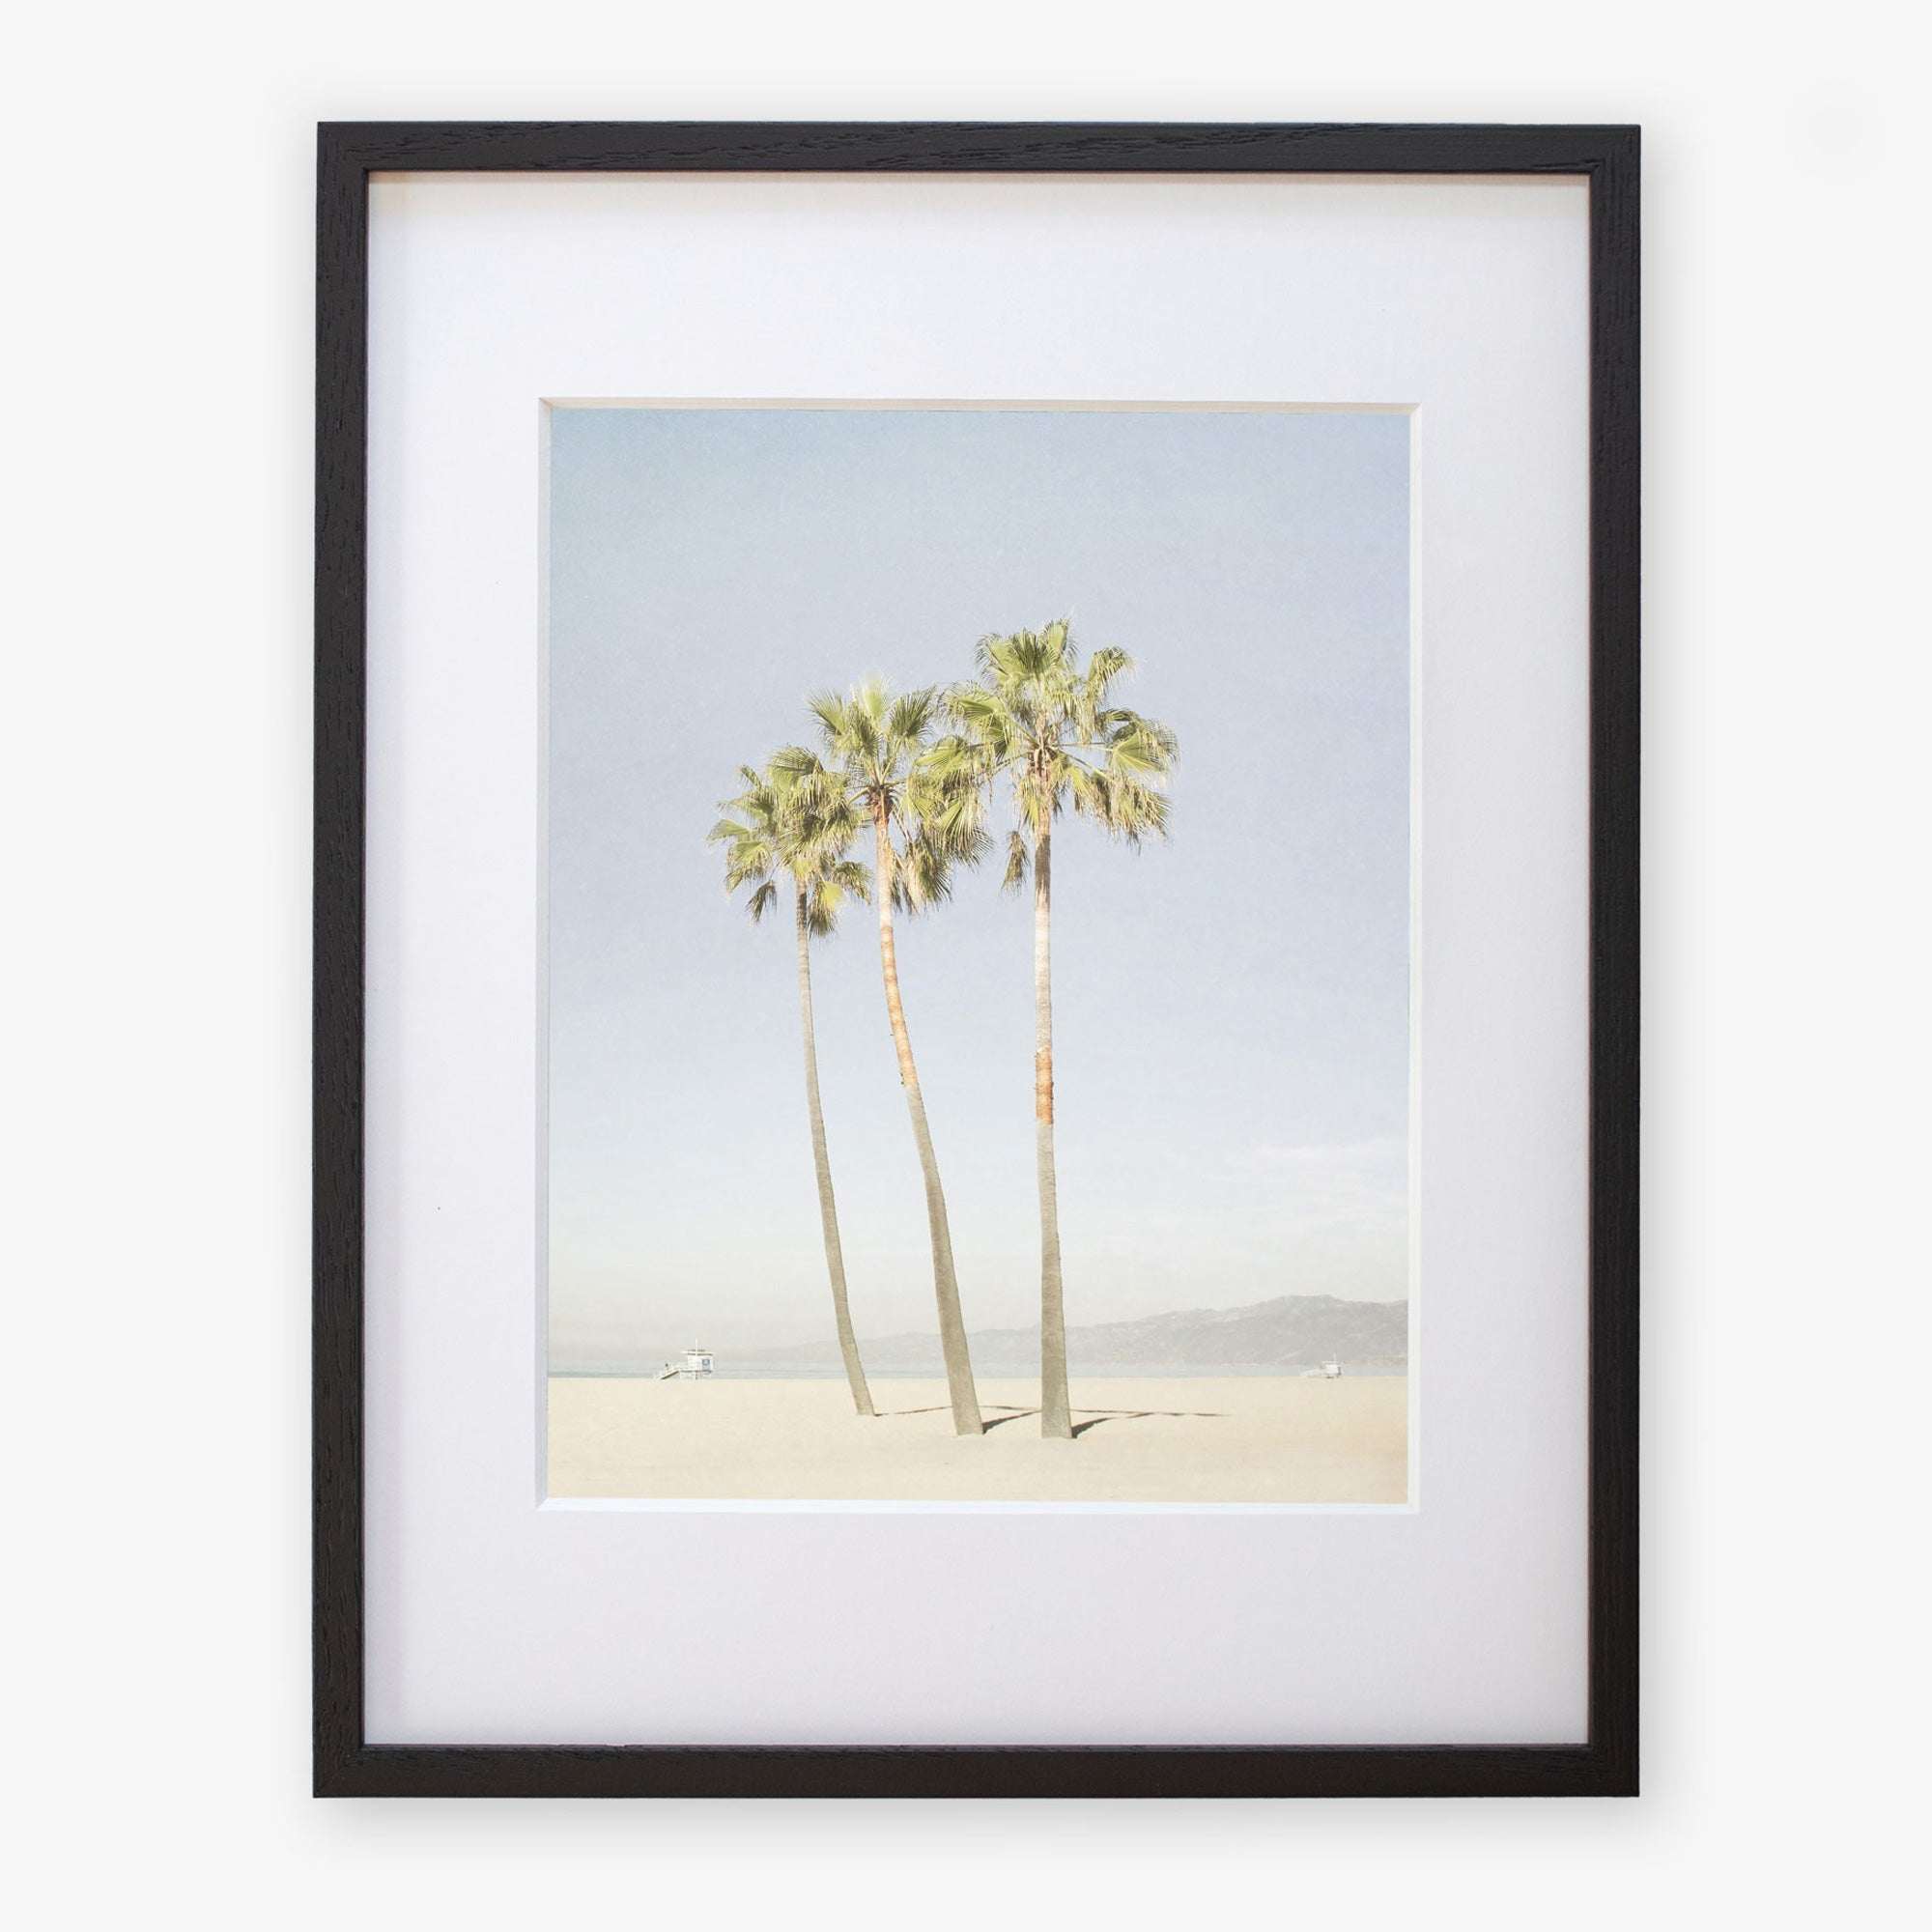 A framed photograph of the California Venice Beach Print &#39;Three Palms&#39; by Offley Green, depicting three tall palm trees on Venice Beach under a clear sky, displayed against a white background.